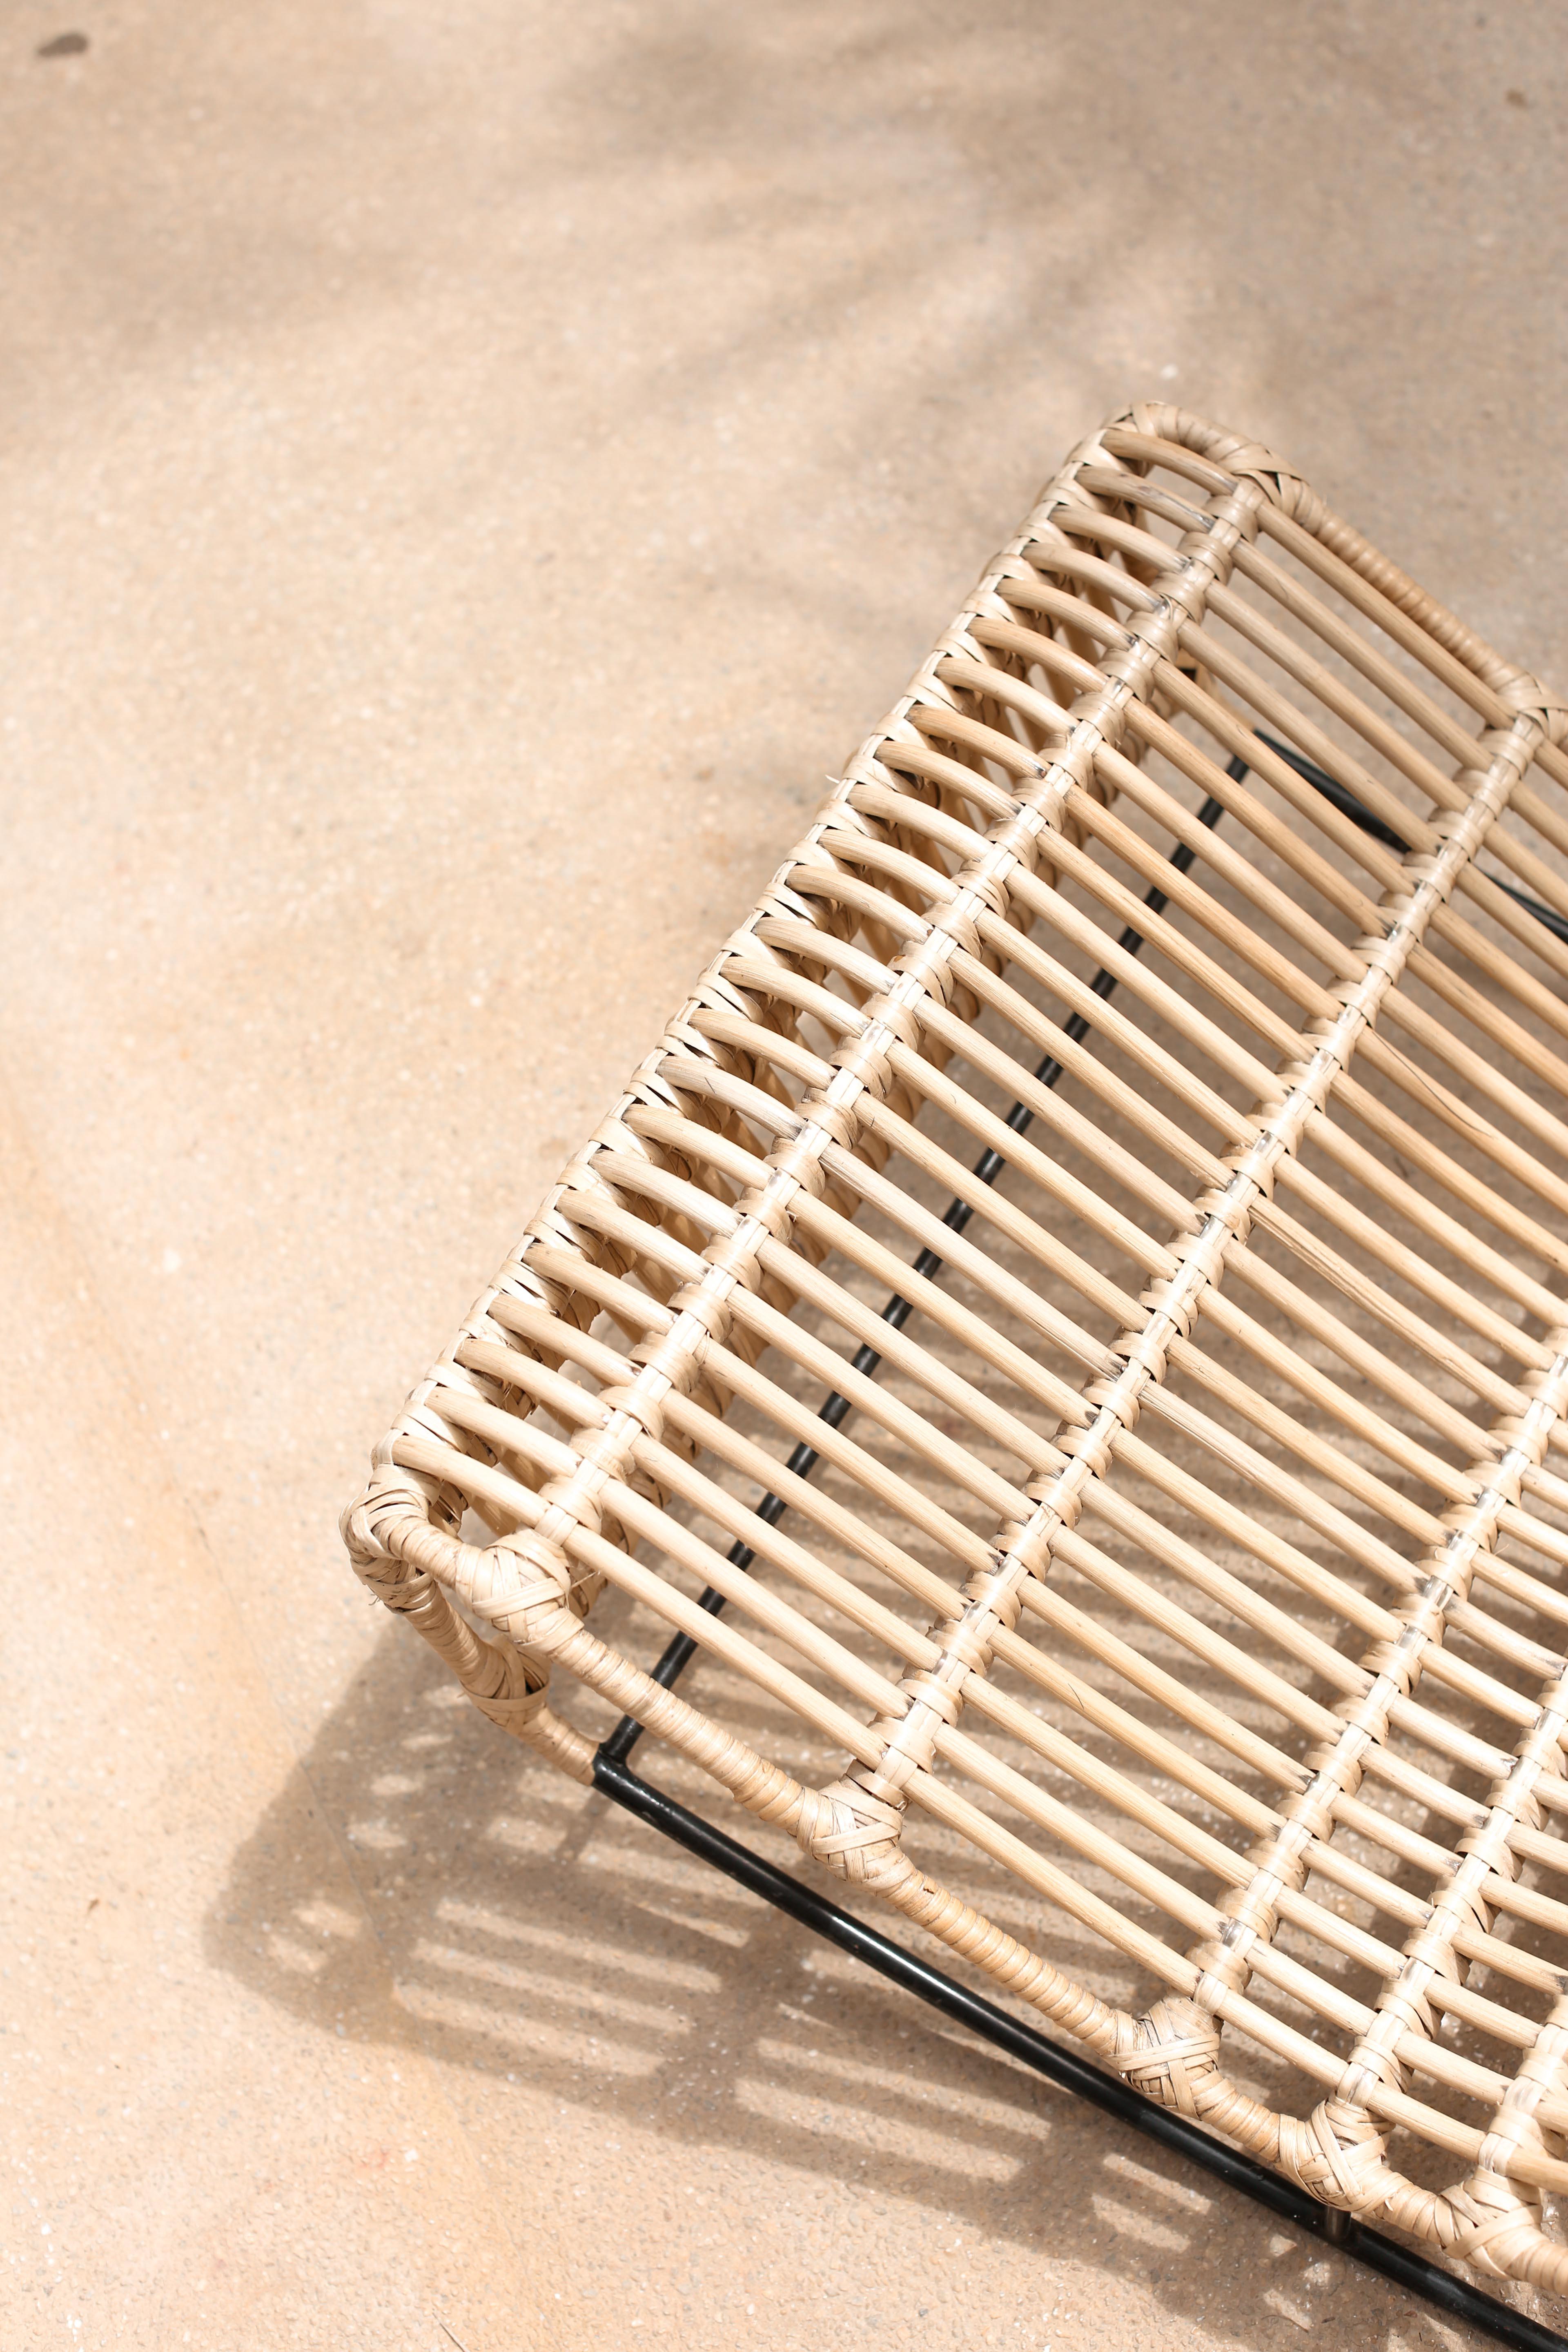 Mexican Handwoven Jambi Deck Chair, Powder-Coated Steel and Natural Rattan, Mexico City For Sale